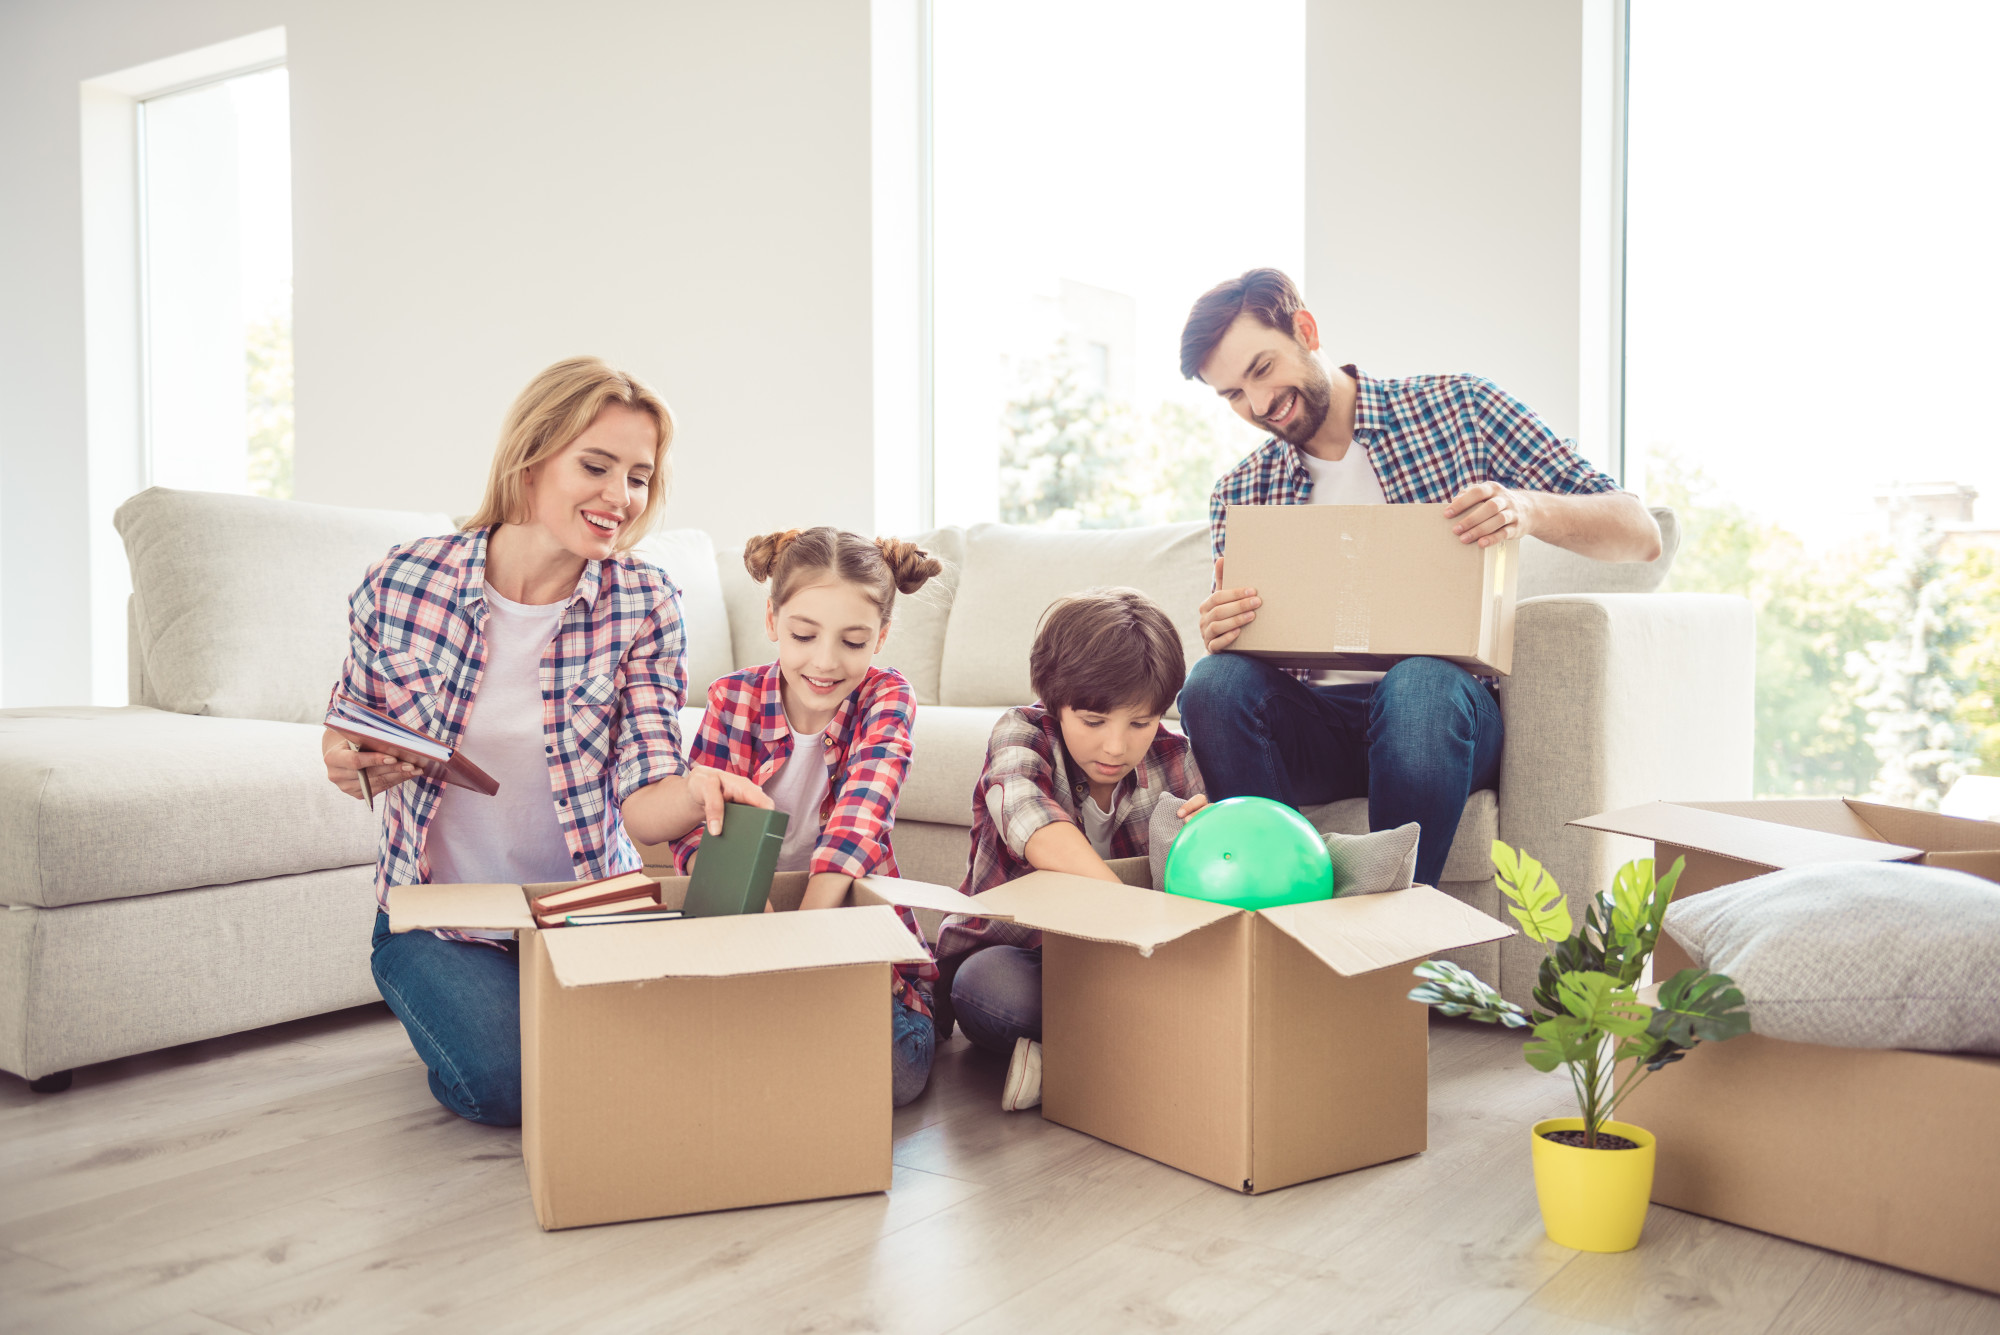 Young happy smiling family four persons unwrapping carton boxes with stuff in light living room, moving to new flat, renovation